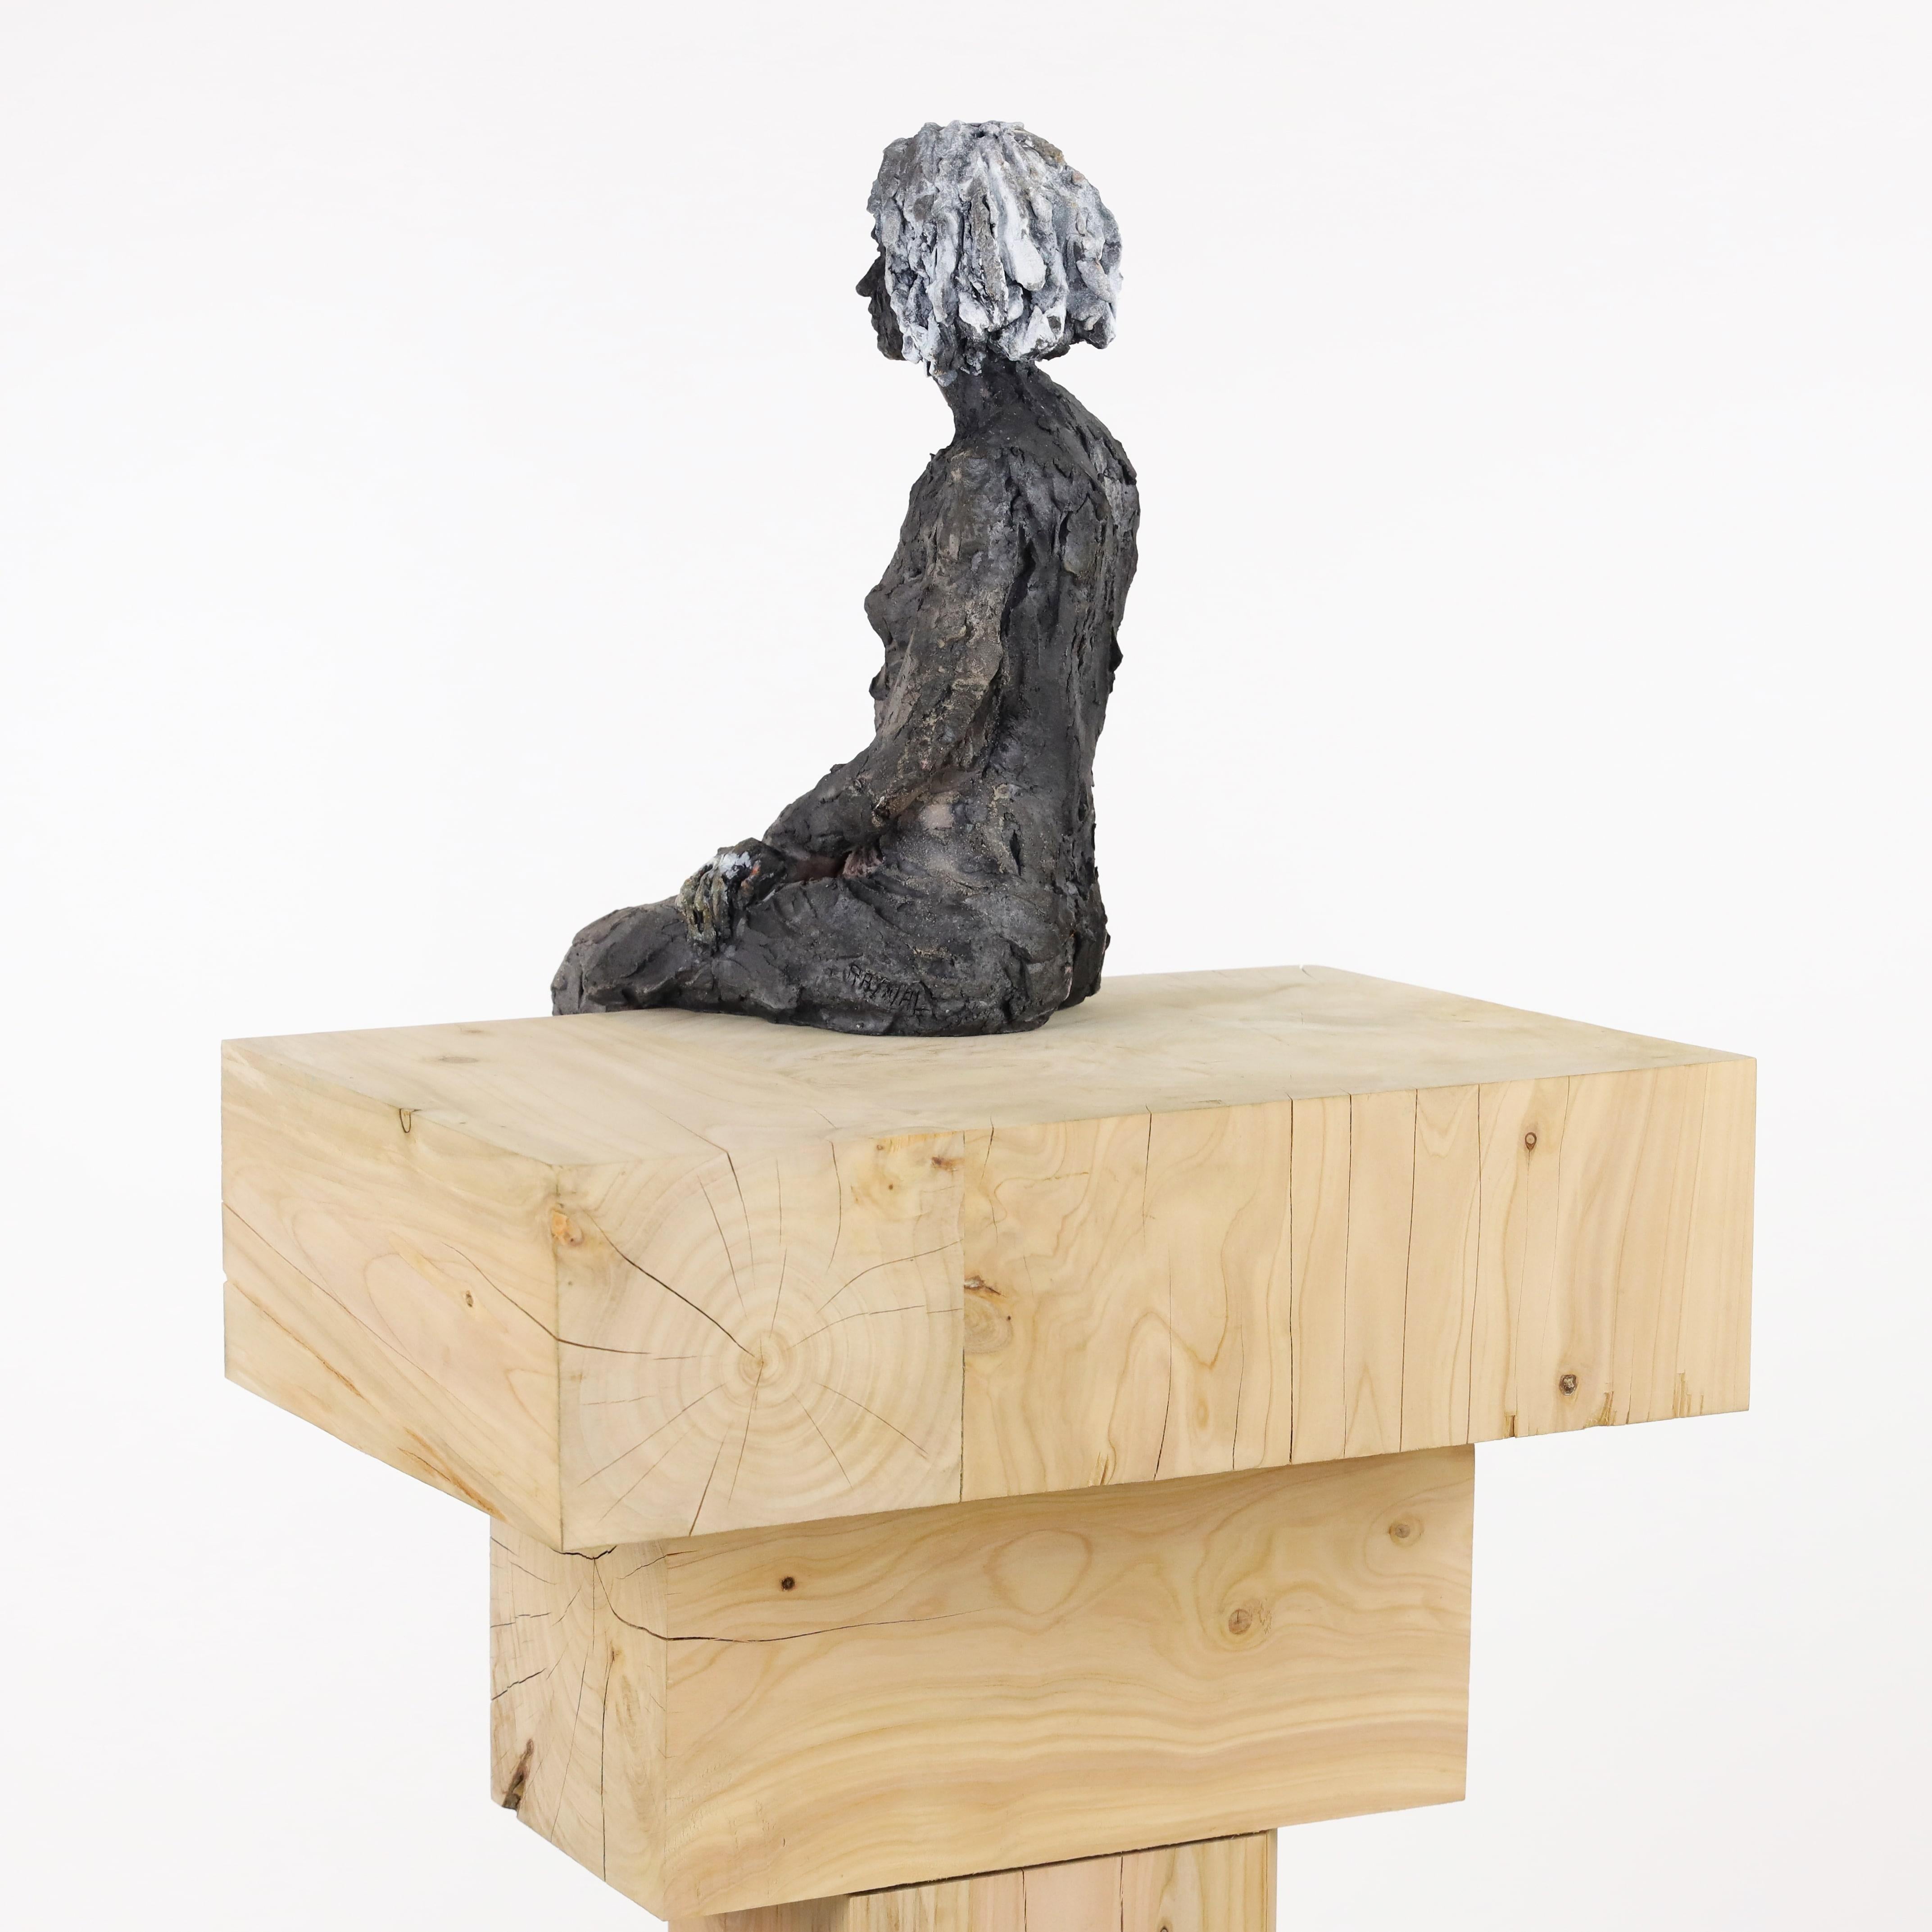 Smoke-fired stoneware sculpture, pigments, cypress plinth.
One-off sculpture sold with a plinth (variable dimensions). Contact us for more details. 
This portrait is part of a series of sculptures designed by the artist during an eight-week art